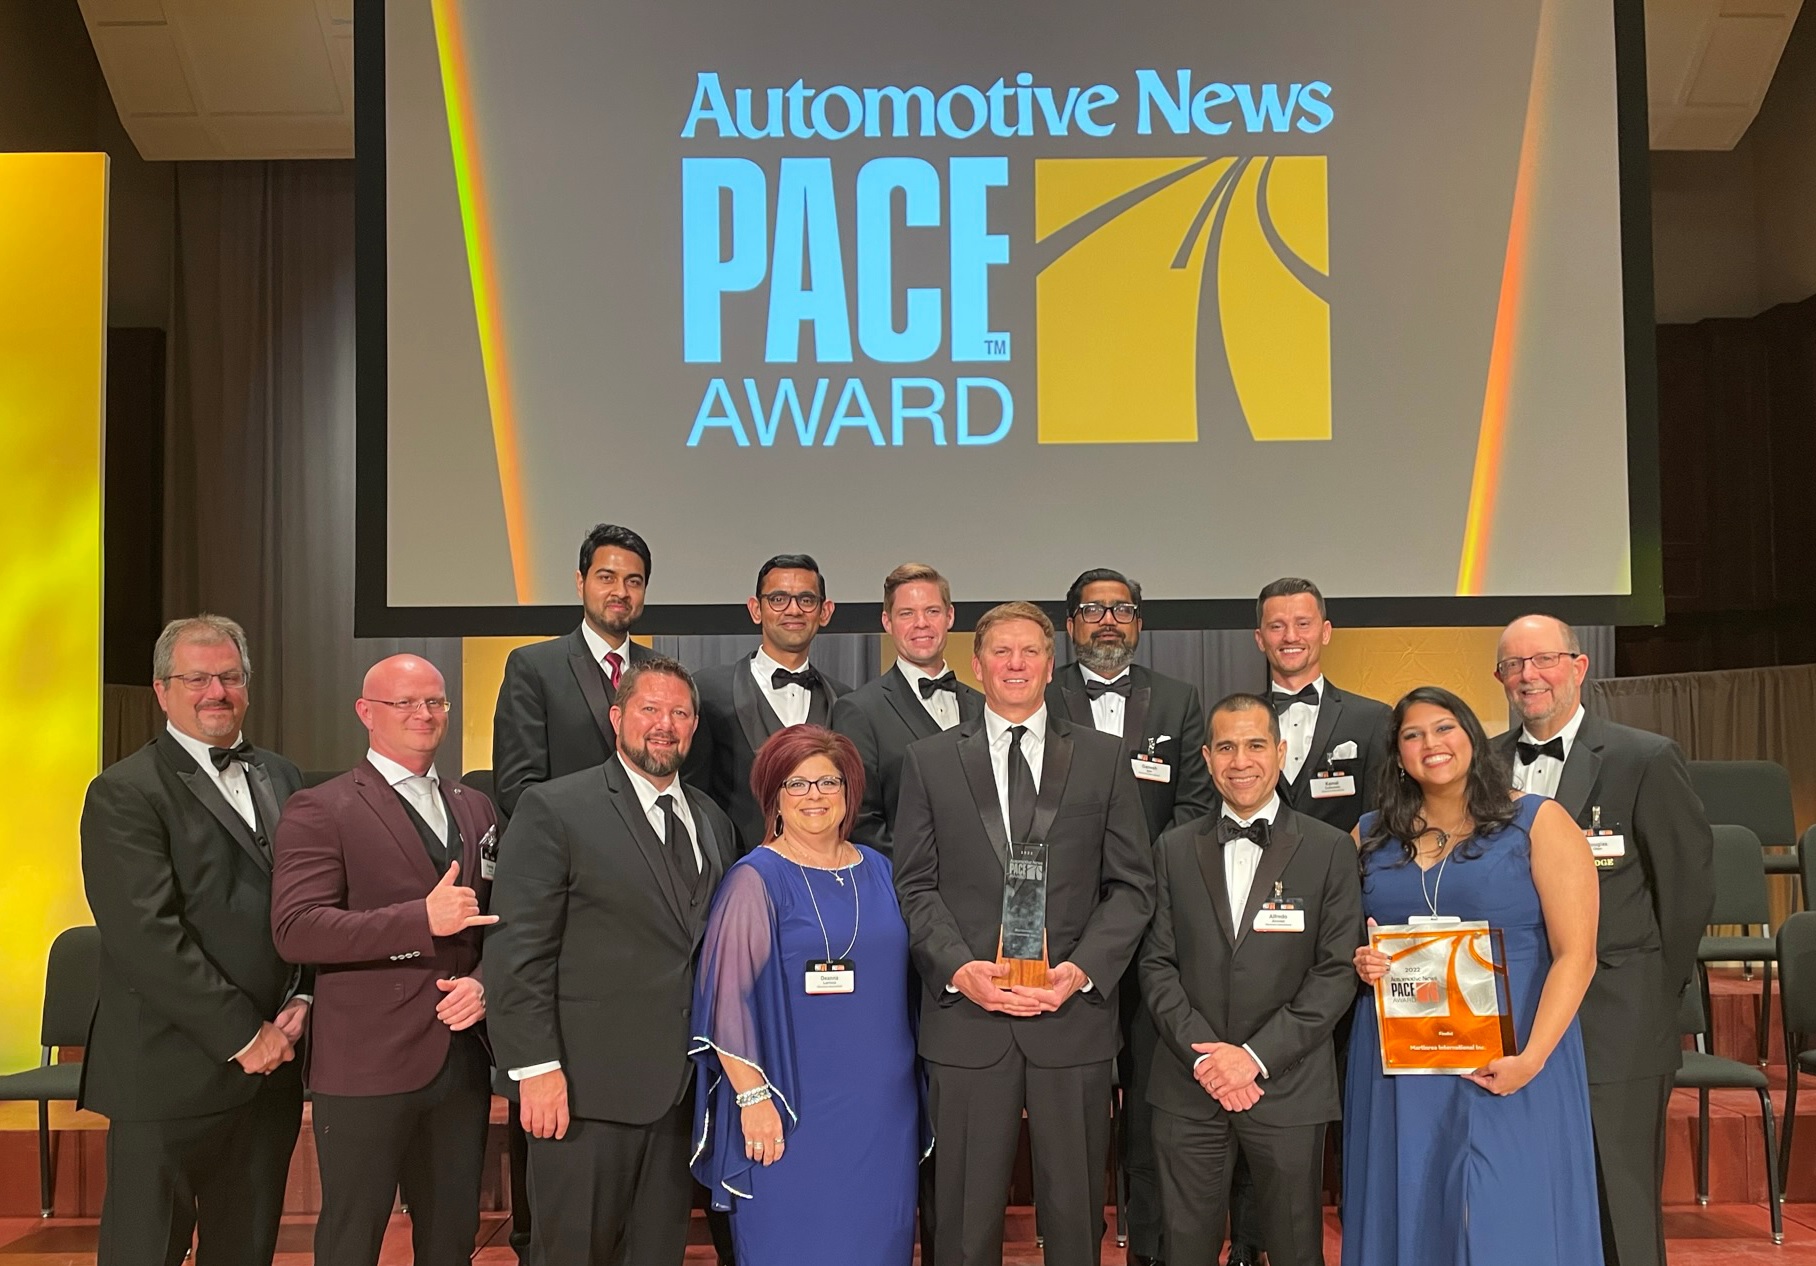 Martinrea President and CEO Pat D’Eramo accepted the PACE Award on behalf of Martinrea during an awards ceremony on September 19, 2022.